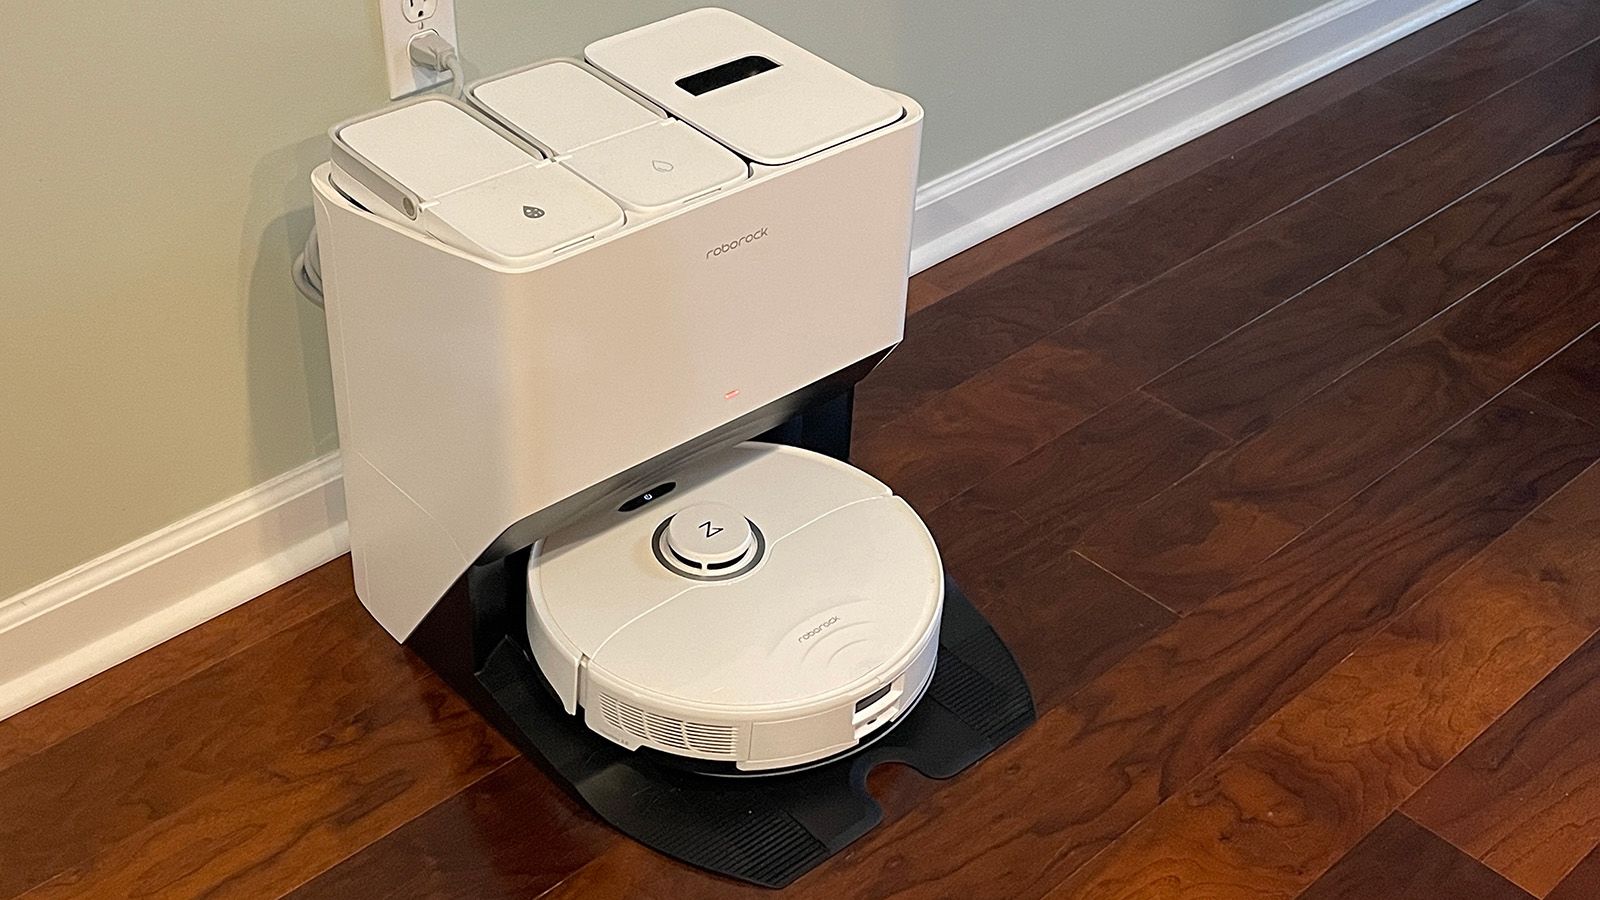 Roborock S8 Pro Ultra review: The ultimate hands-free robot vacuum